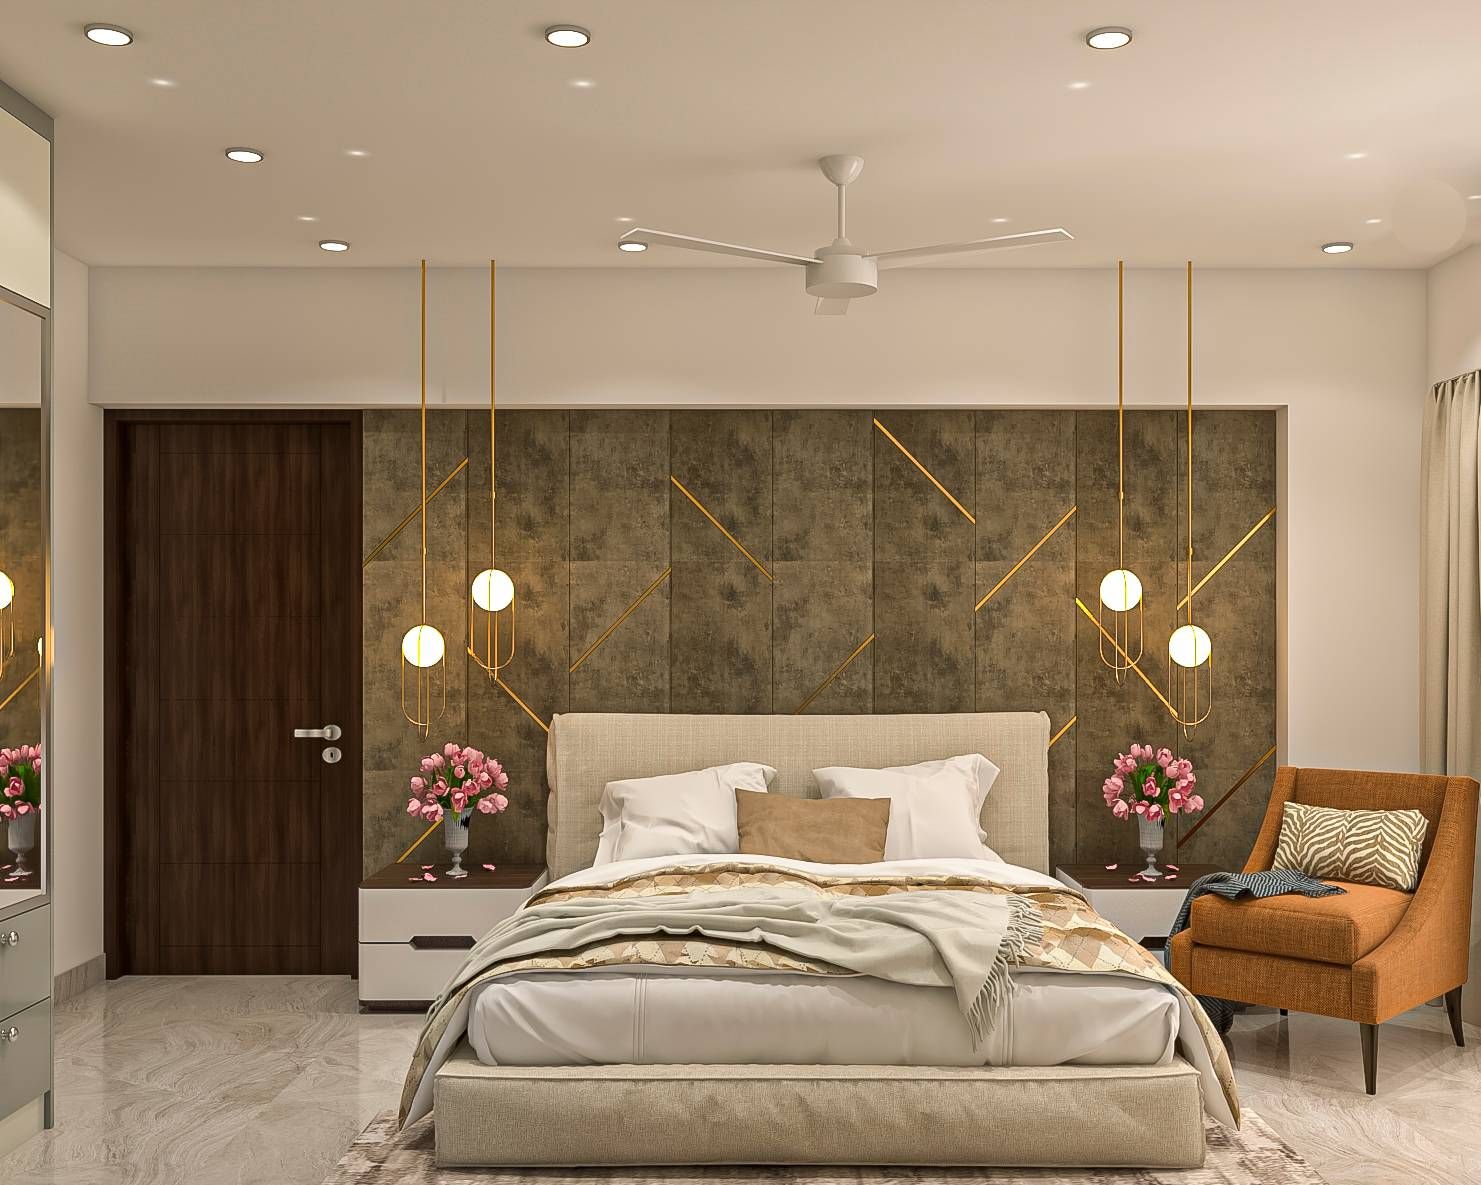 Contemporary Master Bedroom Design With Grey Upholstered Bed And Cream Tufted Headboard